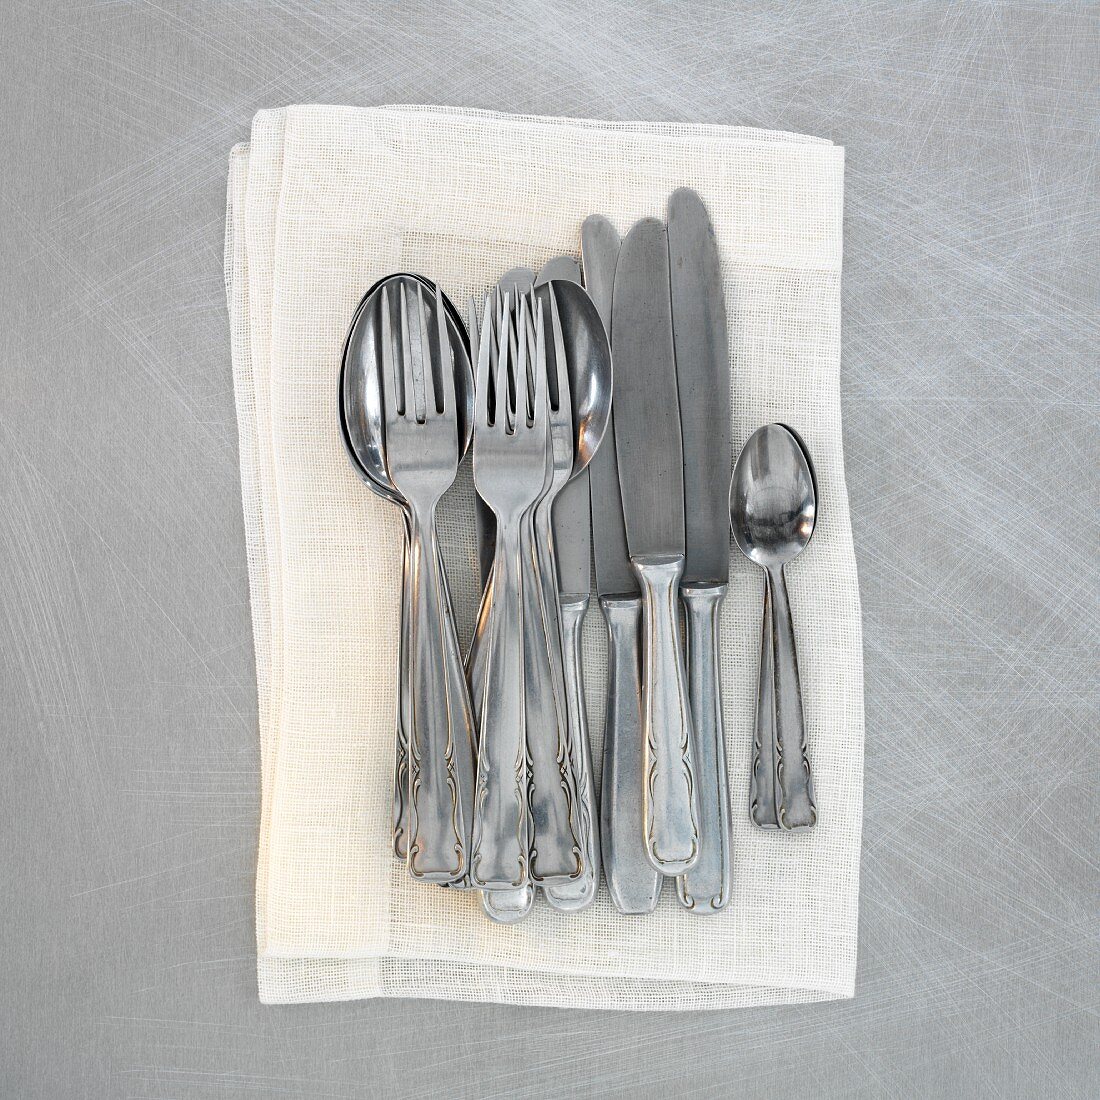 Old cutlery on a napkin (seen from above)